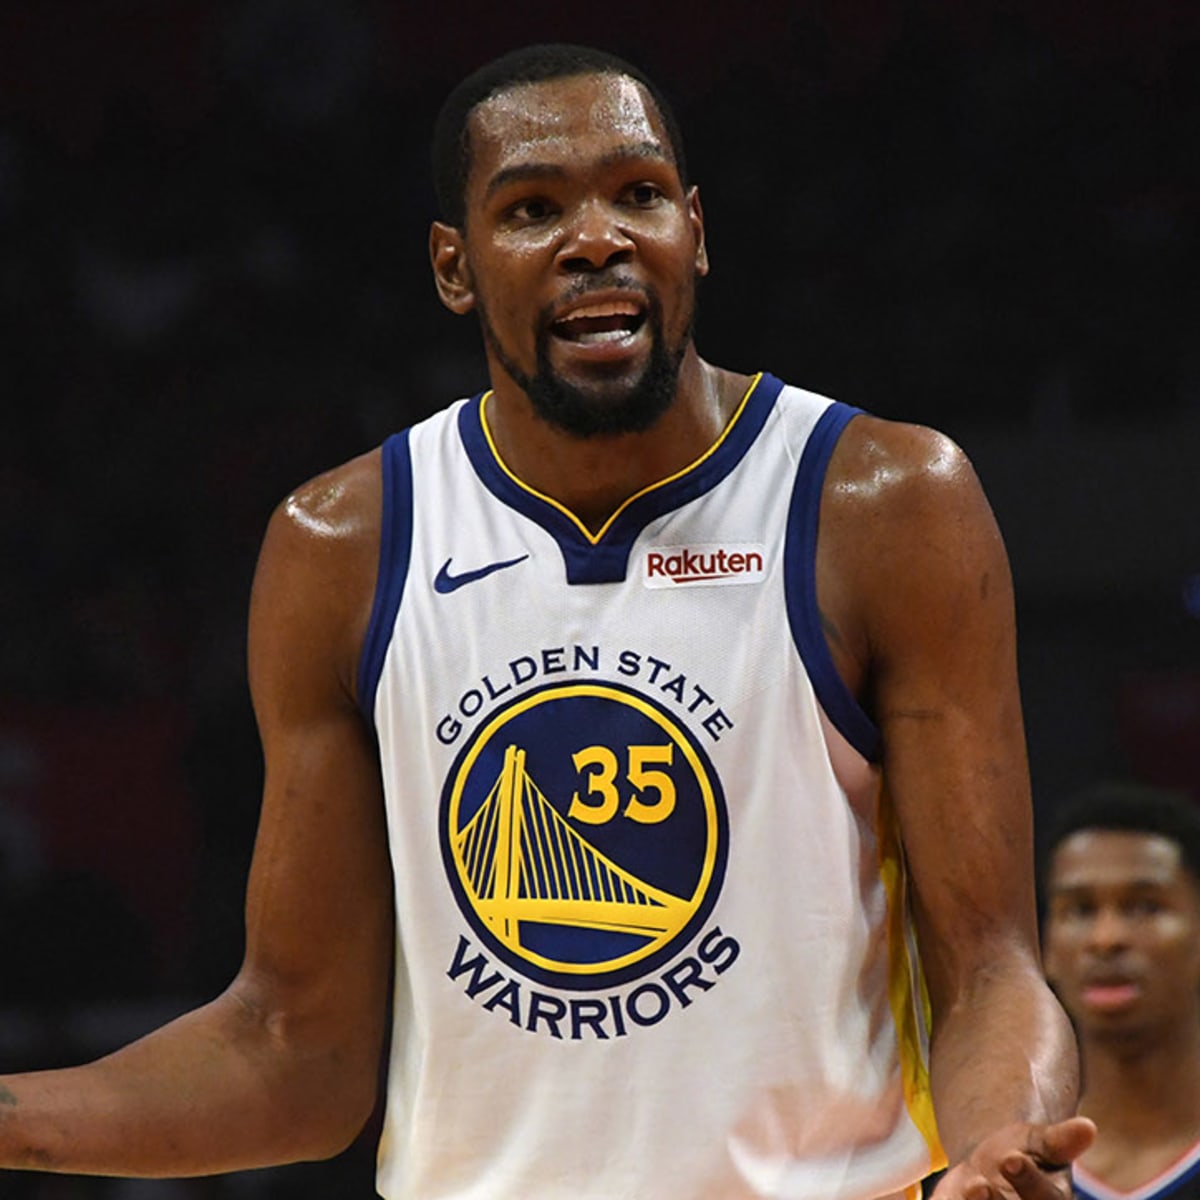 Kevin Durant height: Now listed at 6' 9 1/2 by Nets - Sports Illustrated